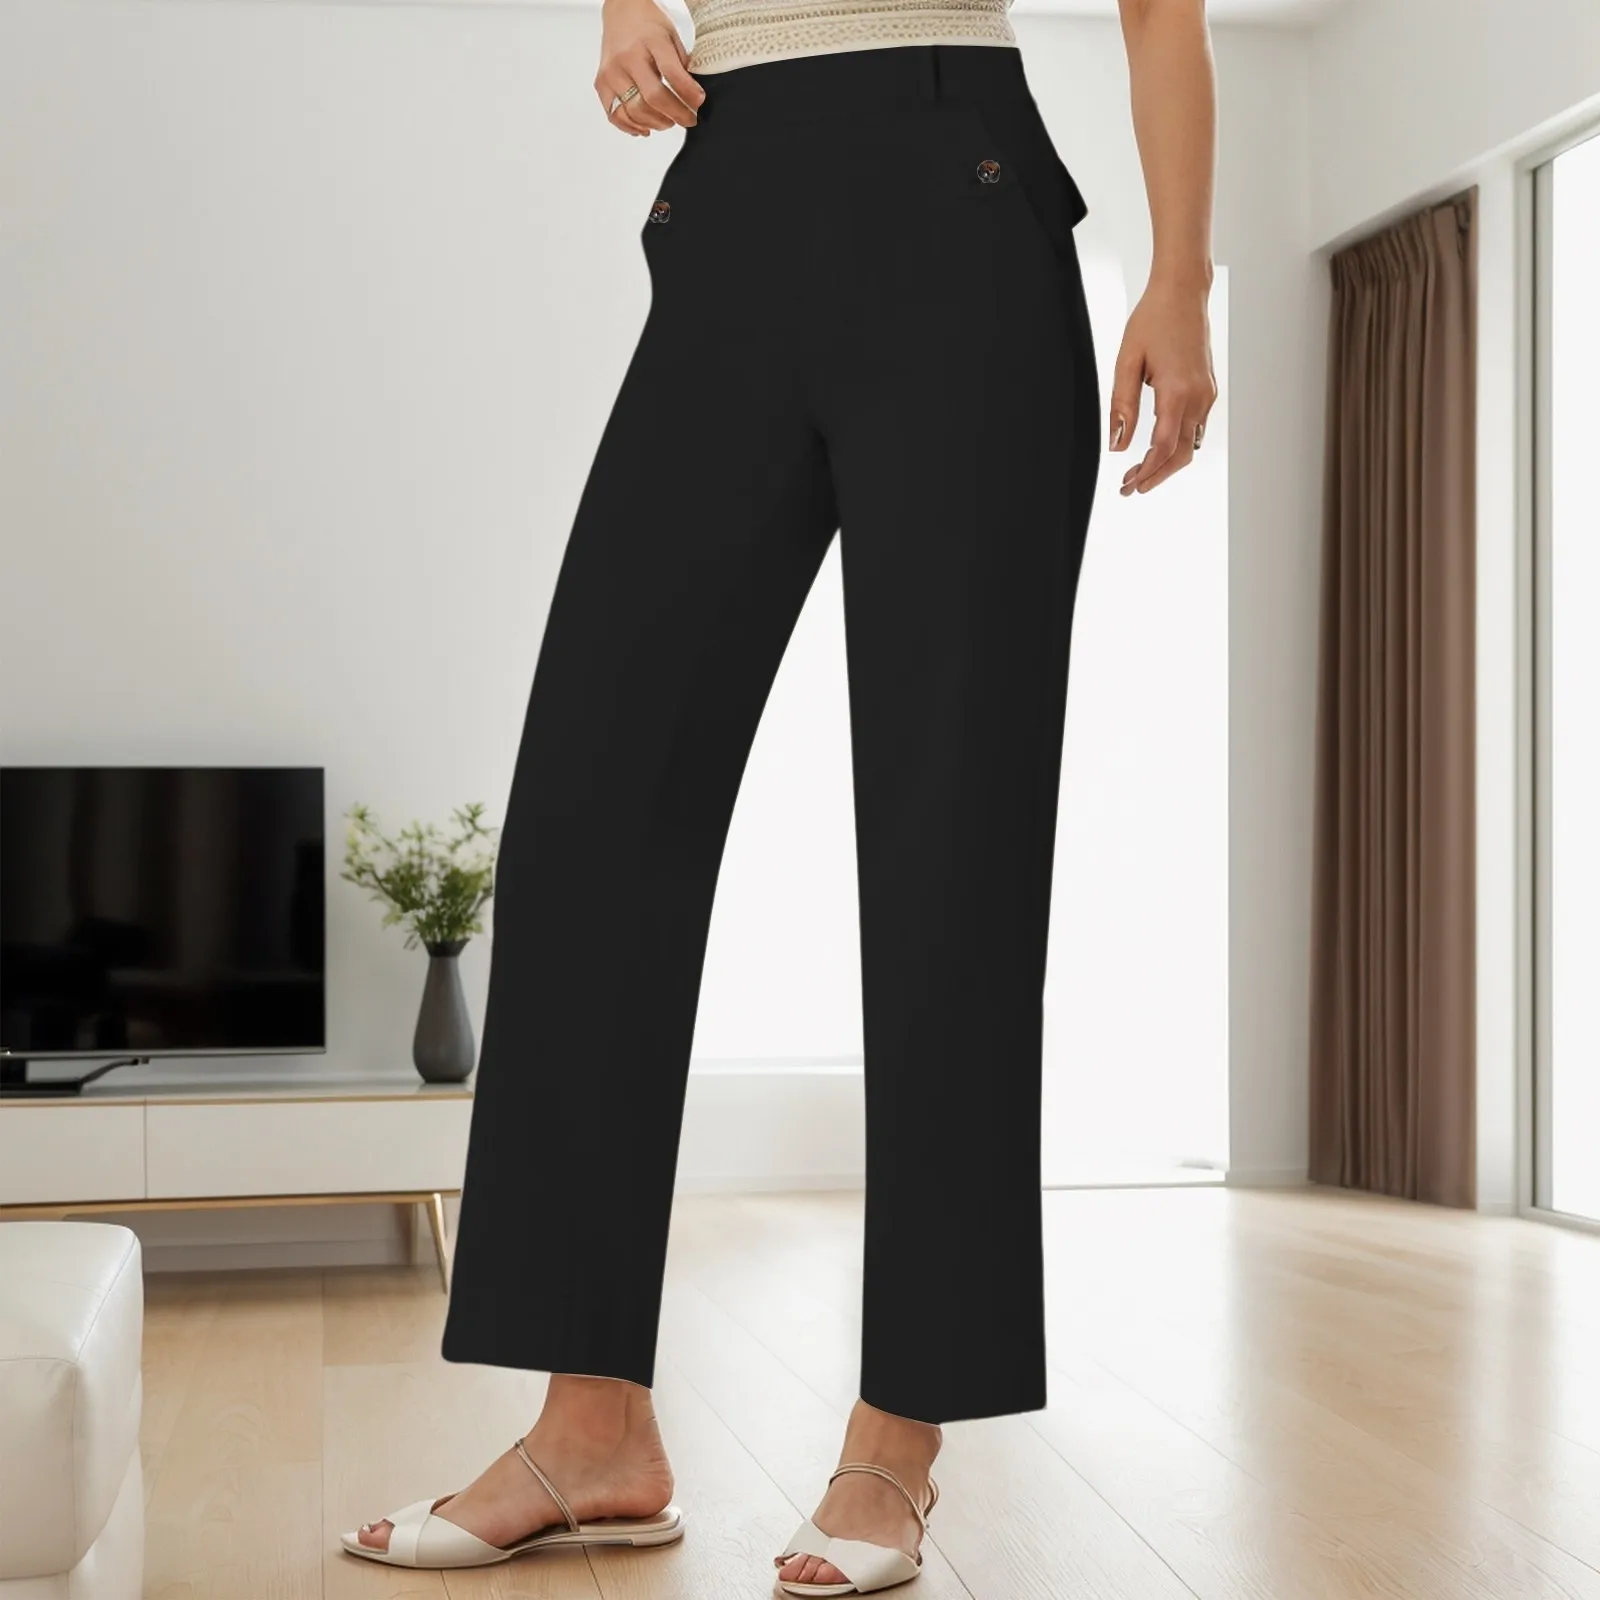 

Fashion High Waist Pants Women Micro Flared Pants Solid Color Casual Slim Fit Slimming Office Lady Casual Streetwear Trousers